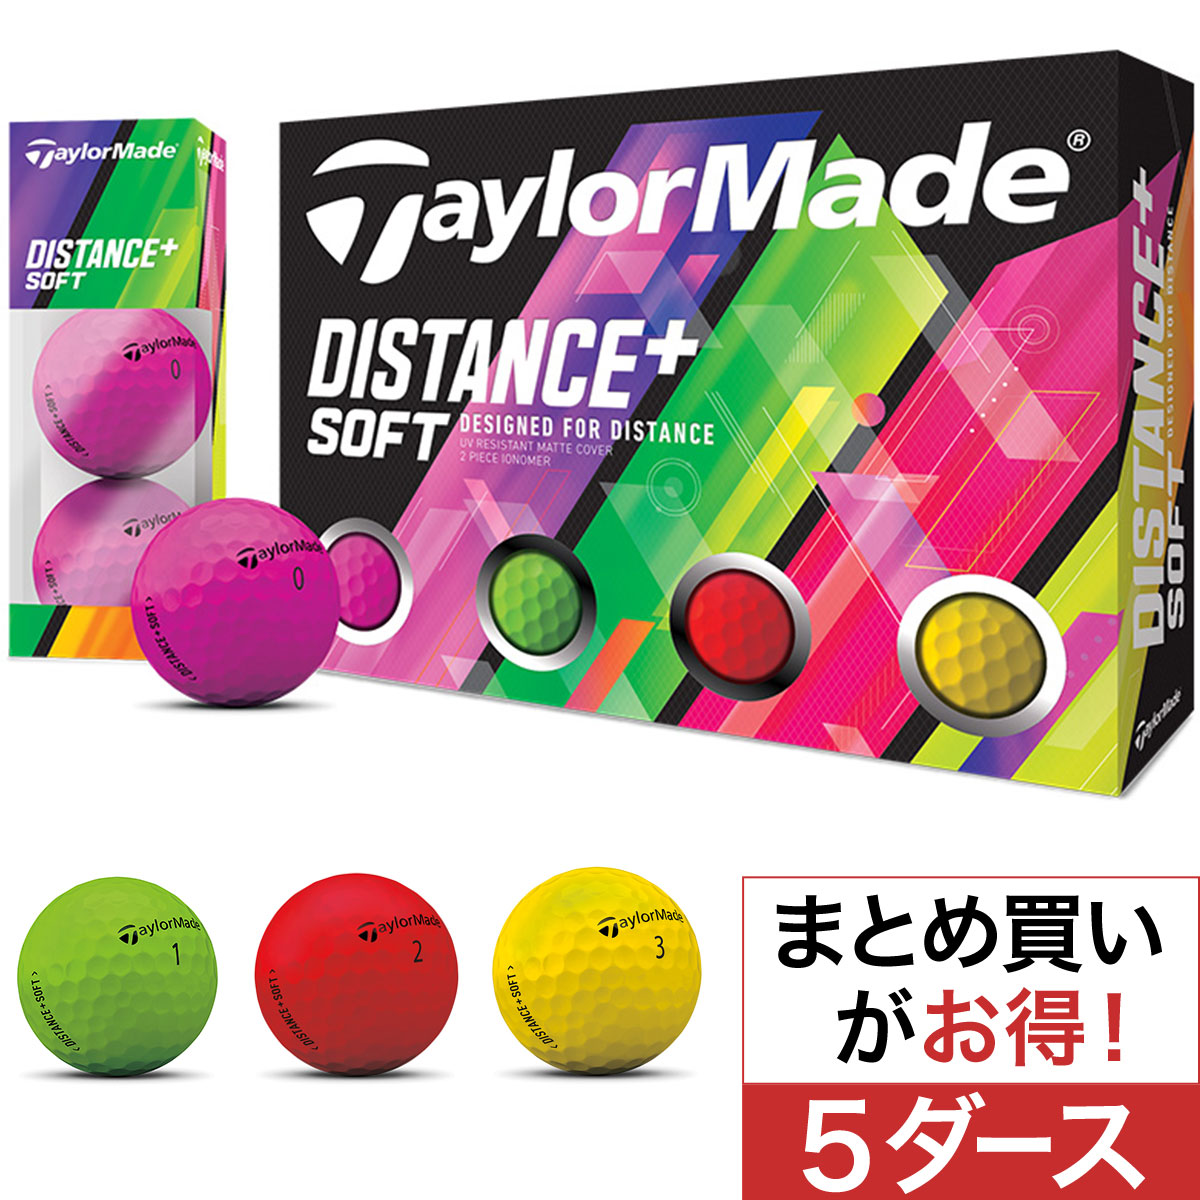  Distance+ ソフト マルチカラーボール 5ダースセット 